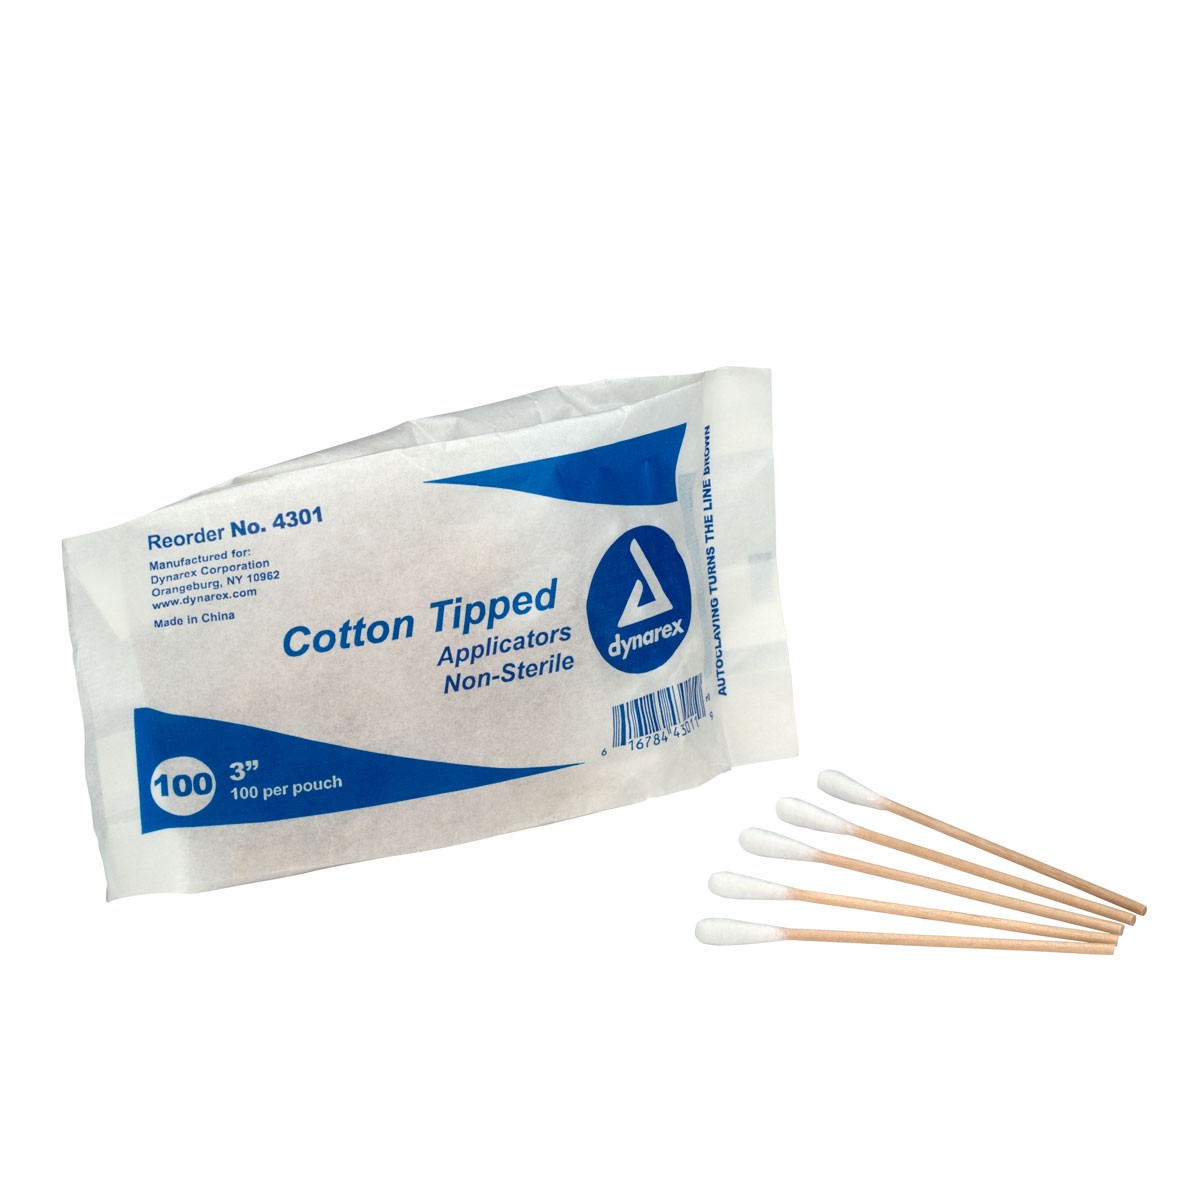 Non-Sterile Cotton Tipped Applicators with 3" Wooden Shaft